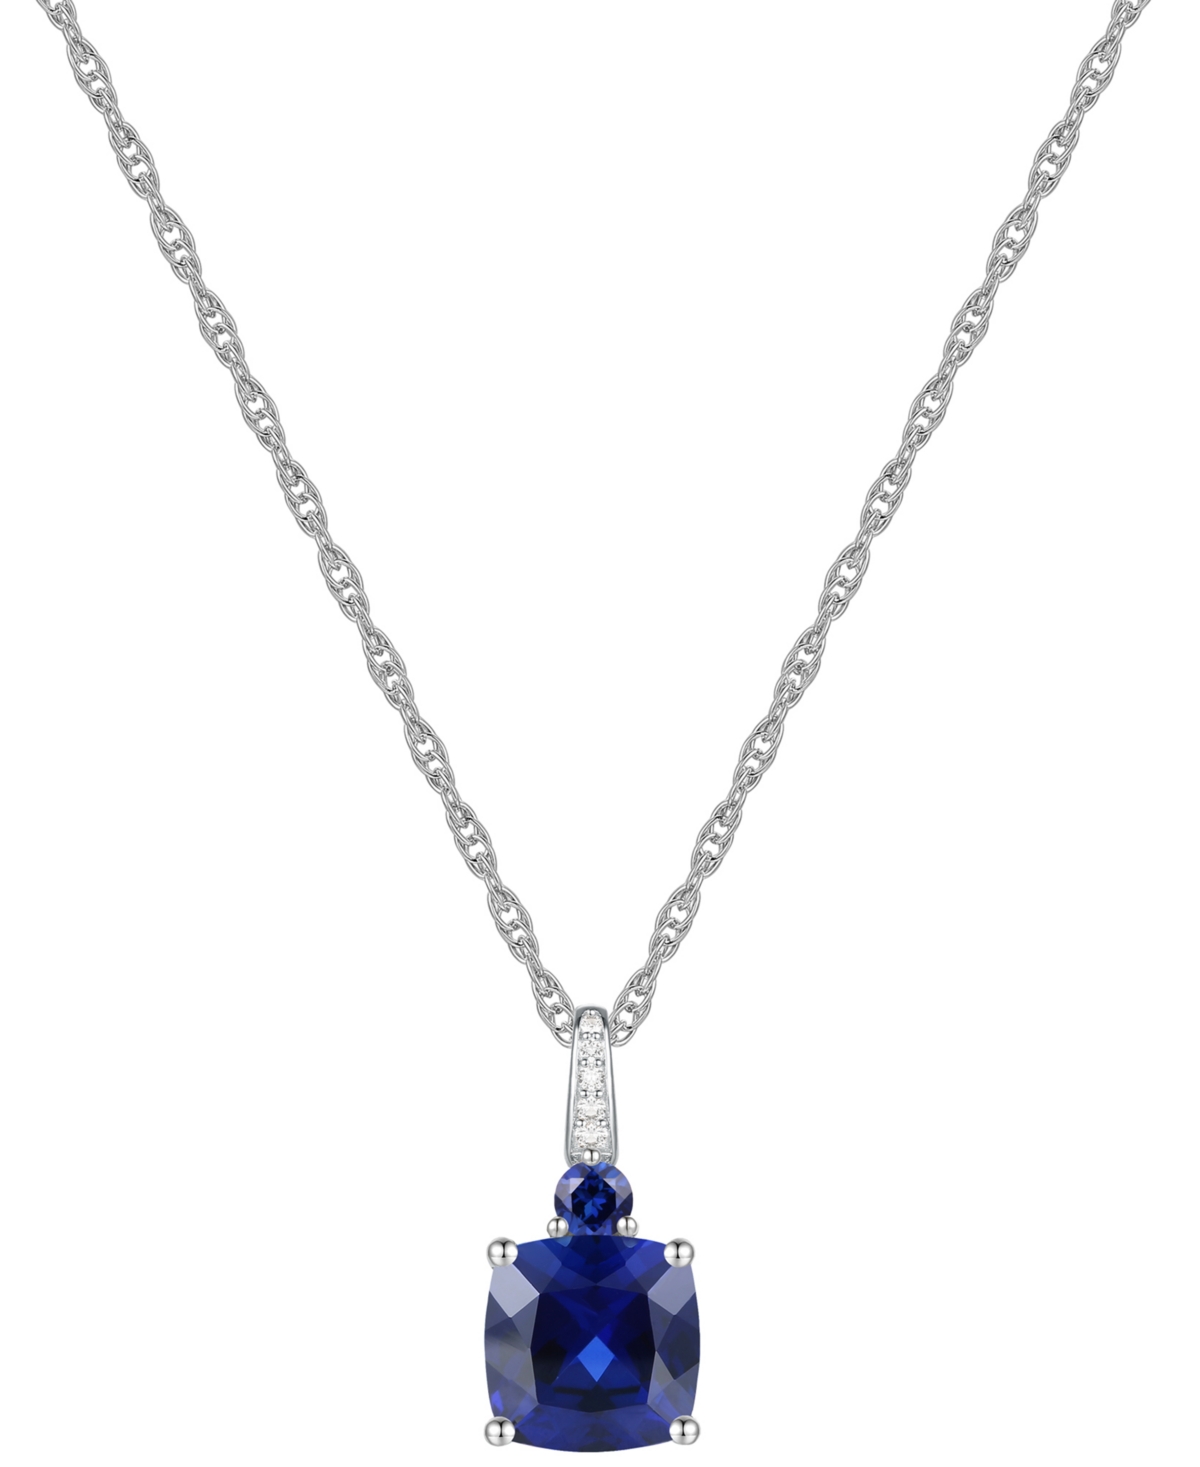 Lab-Grown White Sapphire Accent Gemstone 18" Pendant Necklace in Sterling Silver - Sapphire